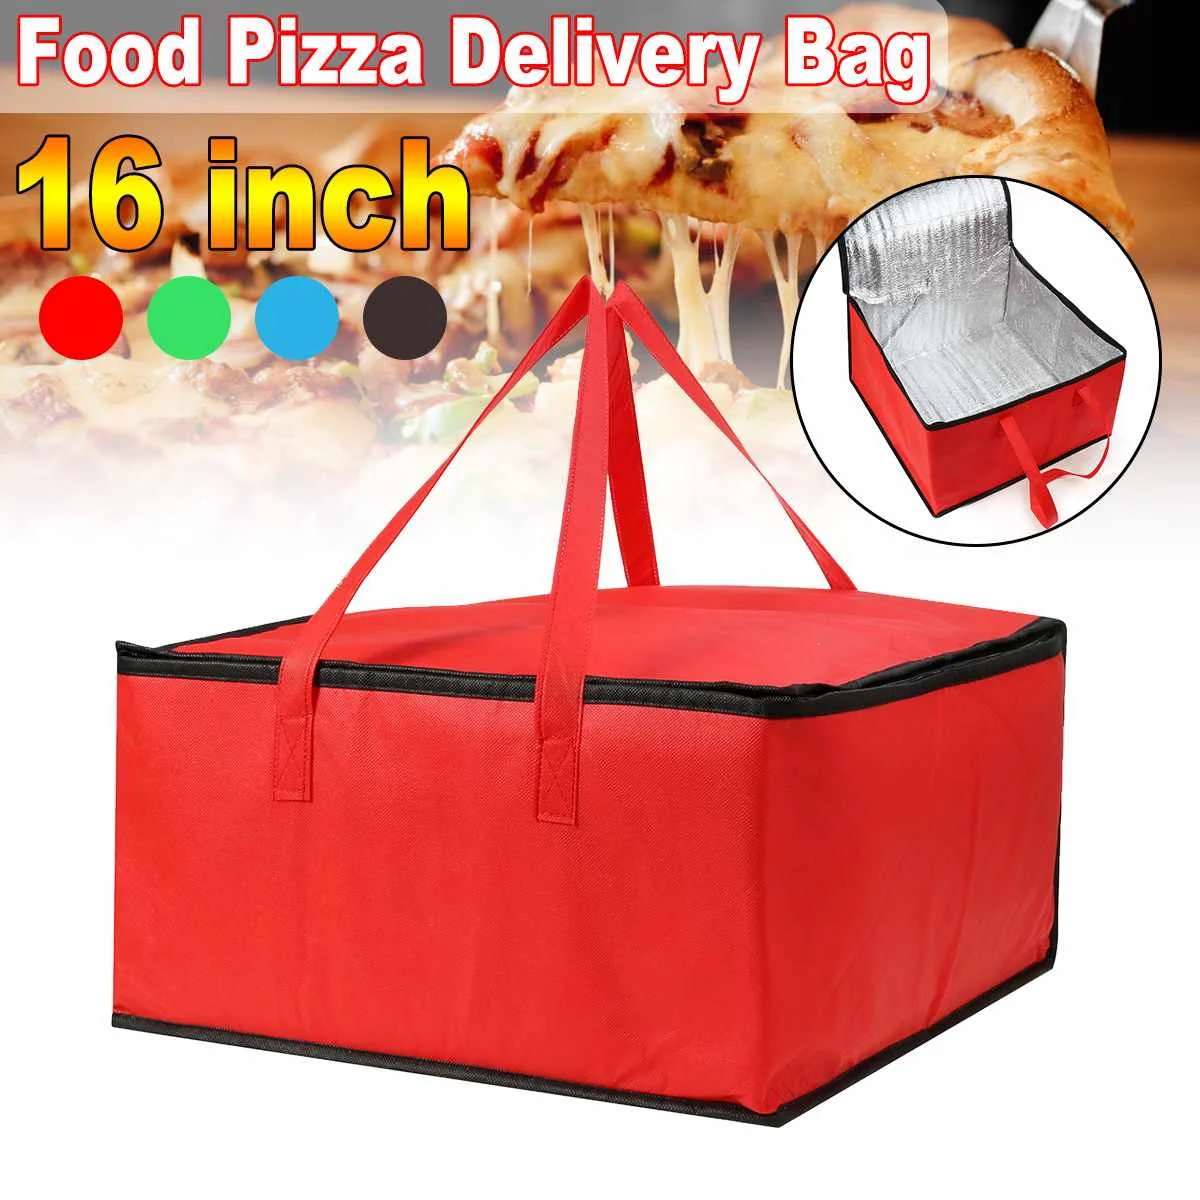 

16 Inch Insulated Bag Lunch Cooler Bag Insulation Folding Picnic Portable Ice Pack Food Thermal Food Delivery Bag Pizza